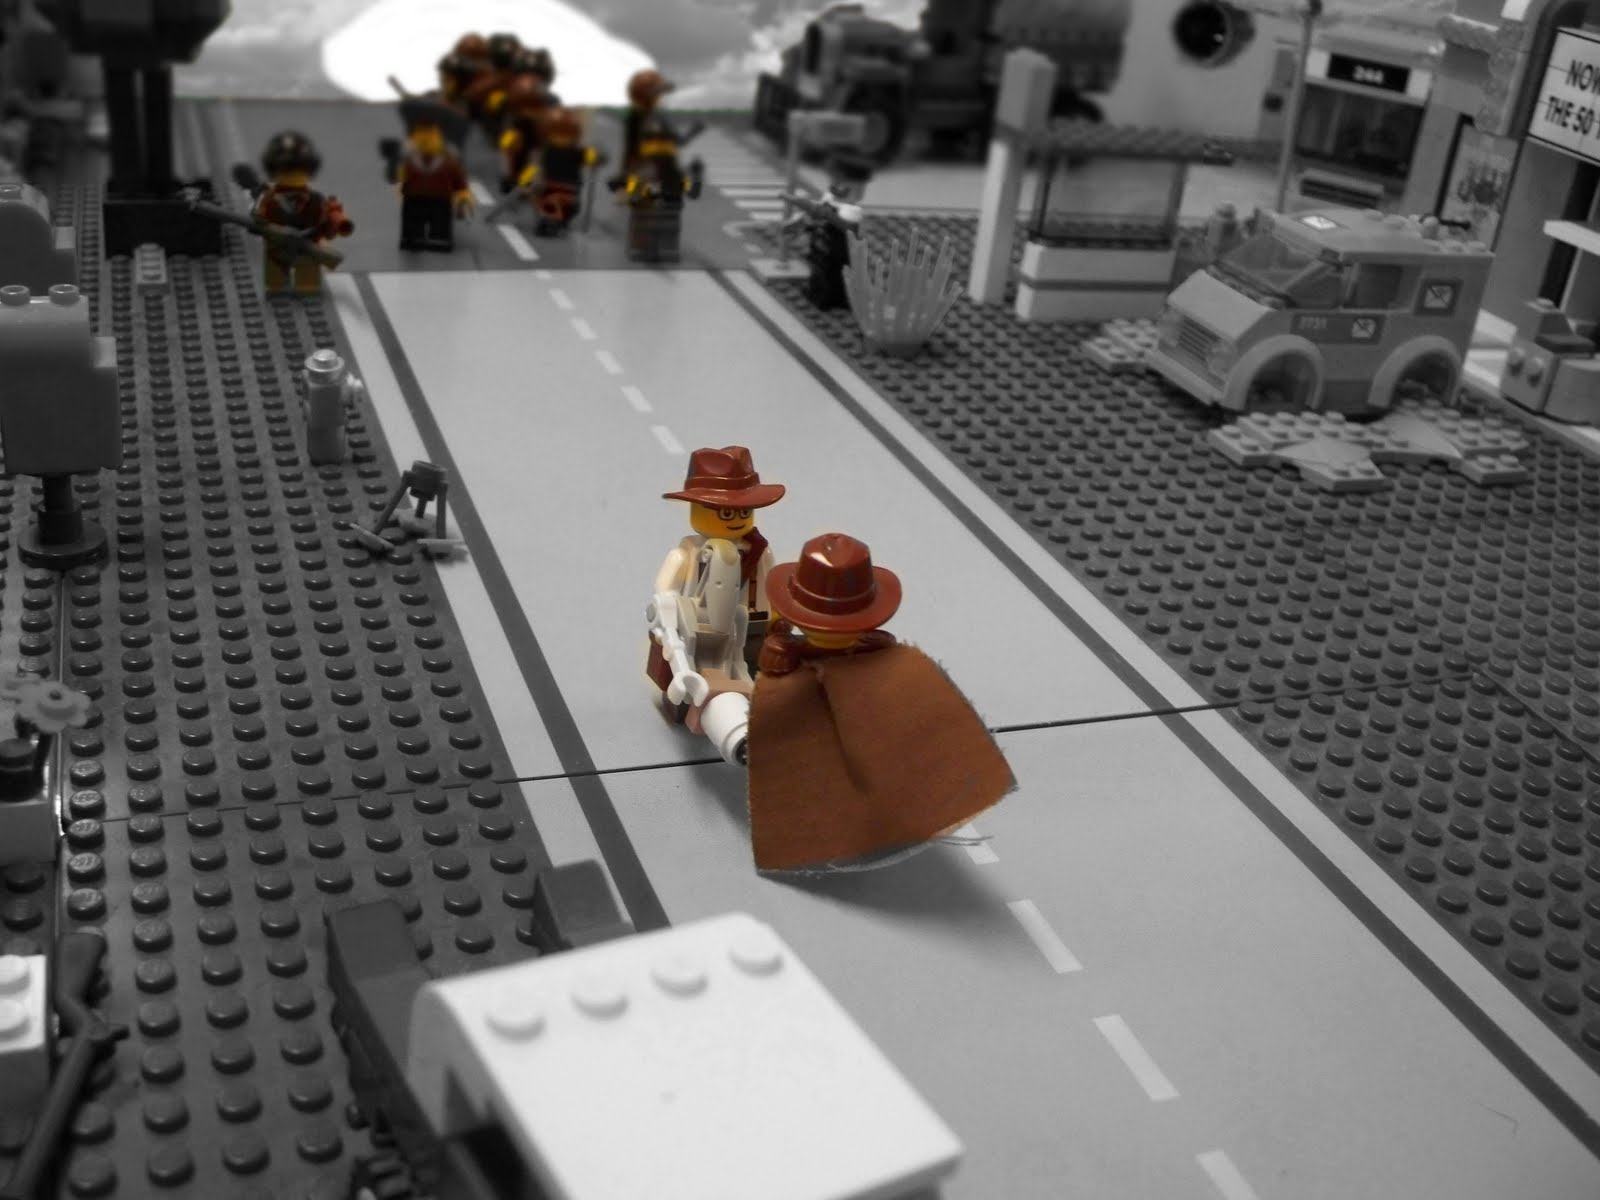 [Dr.+Smith+and+Capt.+Brown+escaping+the+grayed-out+Legopolis.jpg]